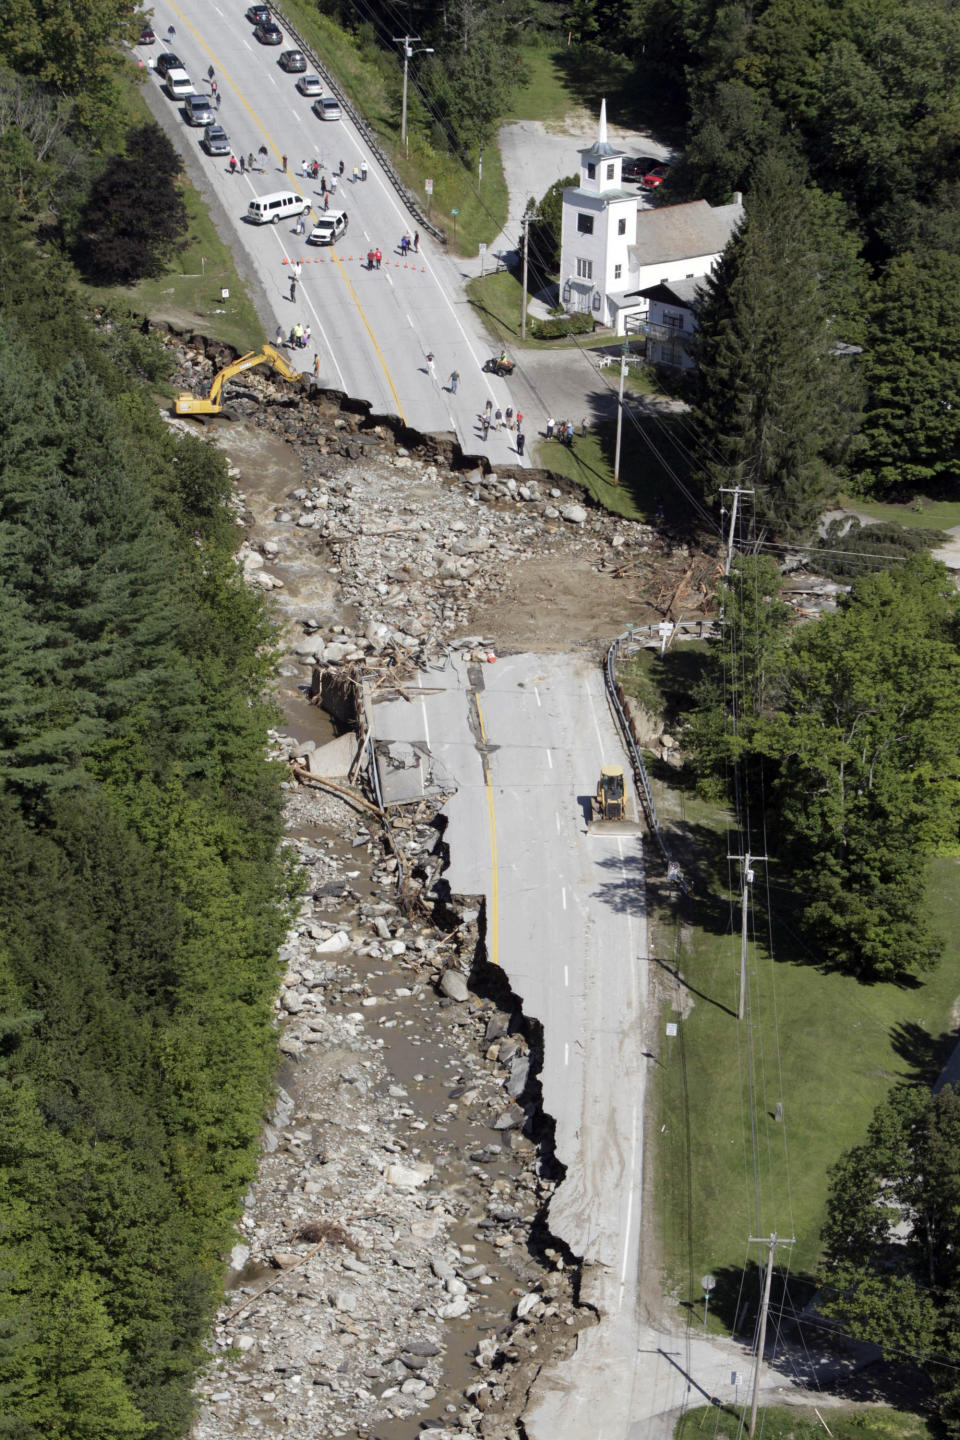 FILE -- This Aug. 30, 2011 file aerial photograph shows destruction of Route 4 in Killington, Vt., after Tropical Storm Irene passed through New England. Global warming is rapidly turning America into a stormy and dangerous place, with rising seas and disasters upending lives from flood-stricken Florida to the wildfire-ravaged West, according to a new U.S. federal scientific report released Tuesday, May 6, 2014. (AP Photo/Toby Talbot, File)